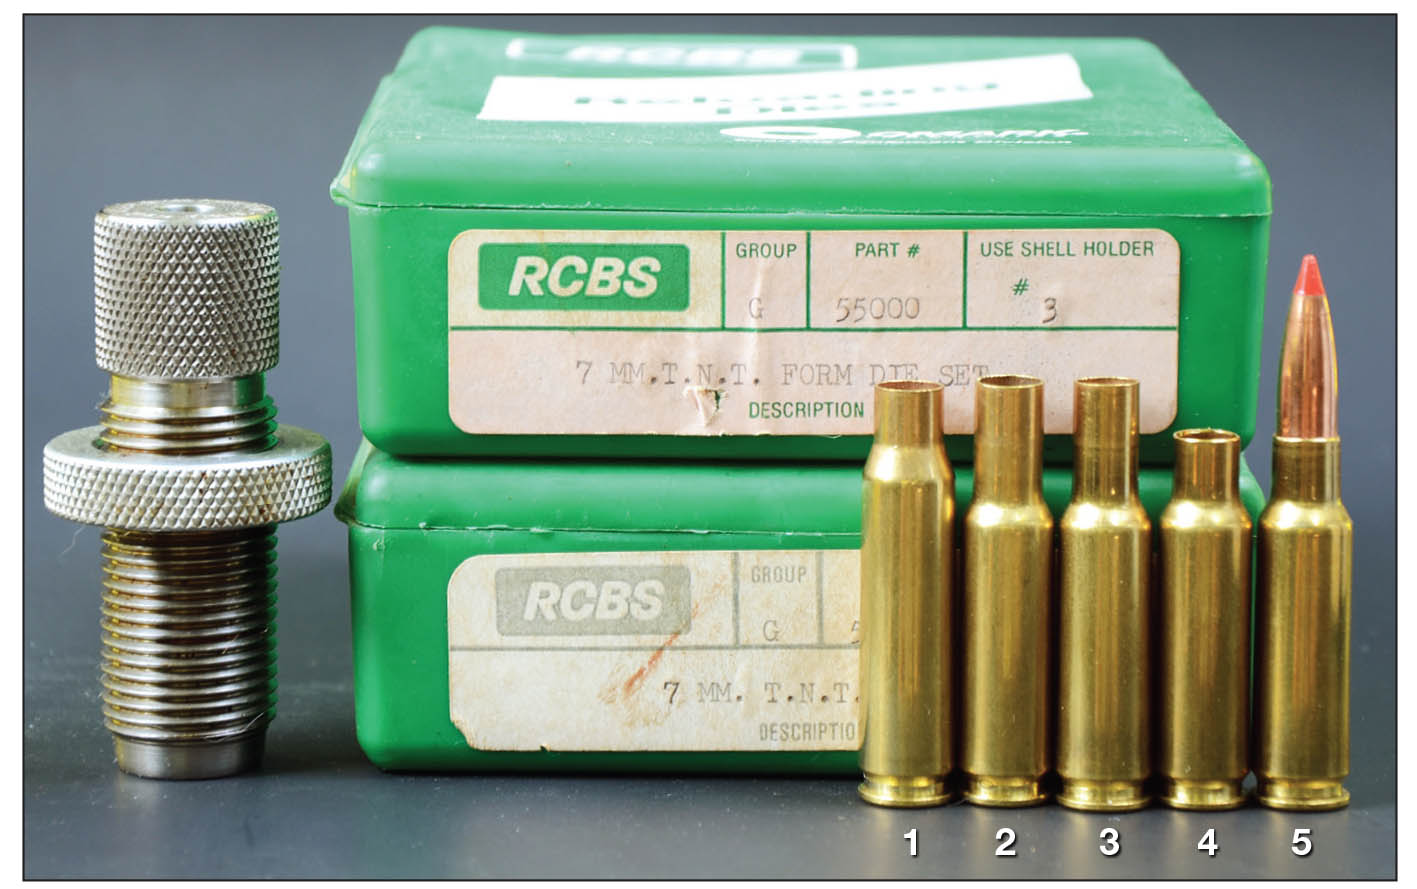 Case forming and reloading dies were included with the custom XP-100 7mm TNT. John Towle recommended forming cases from Remington .308 BR brass pocketed for small rifle primers, which is no longer available. Cases can be formed from  Starline .308 Match cases with small rifle primer pockets, but due to a thicker wall, capacity will be a bit less. These cases include a (1) Starline .308 Match case, (2) shoulder pushed back with form die No. 1, (3) the neck diameter reduced for 7mm bullets with trim die, (4) case neck trimmed and full-length resized and a (5) loaded round.